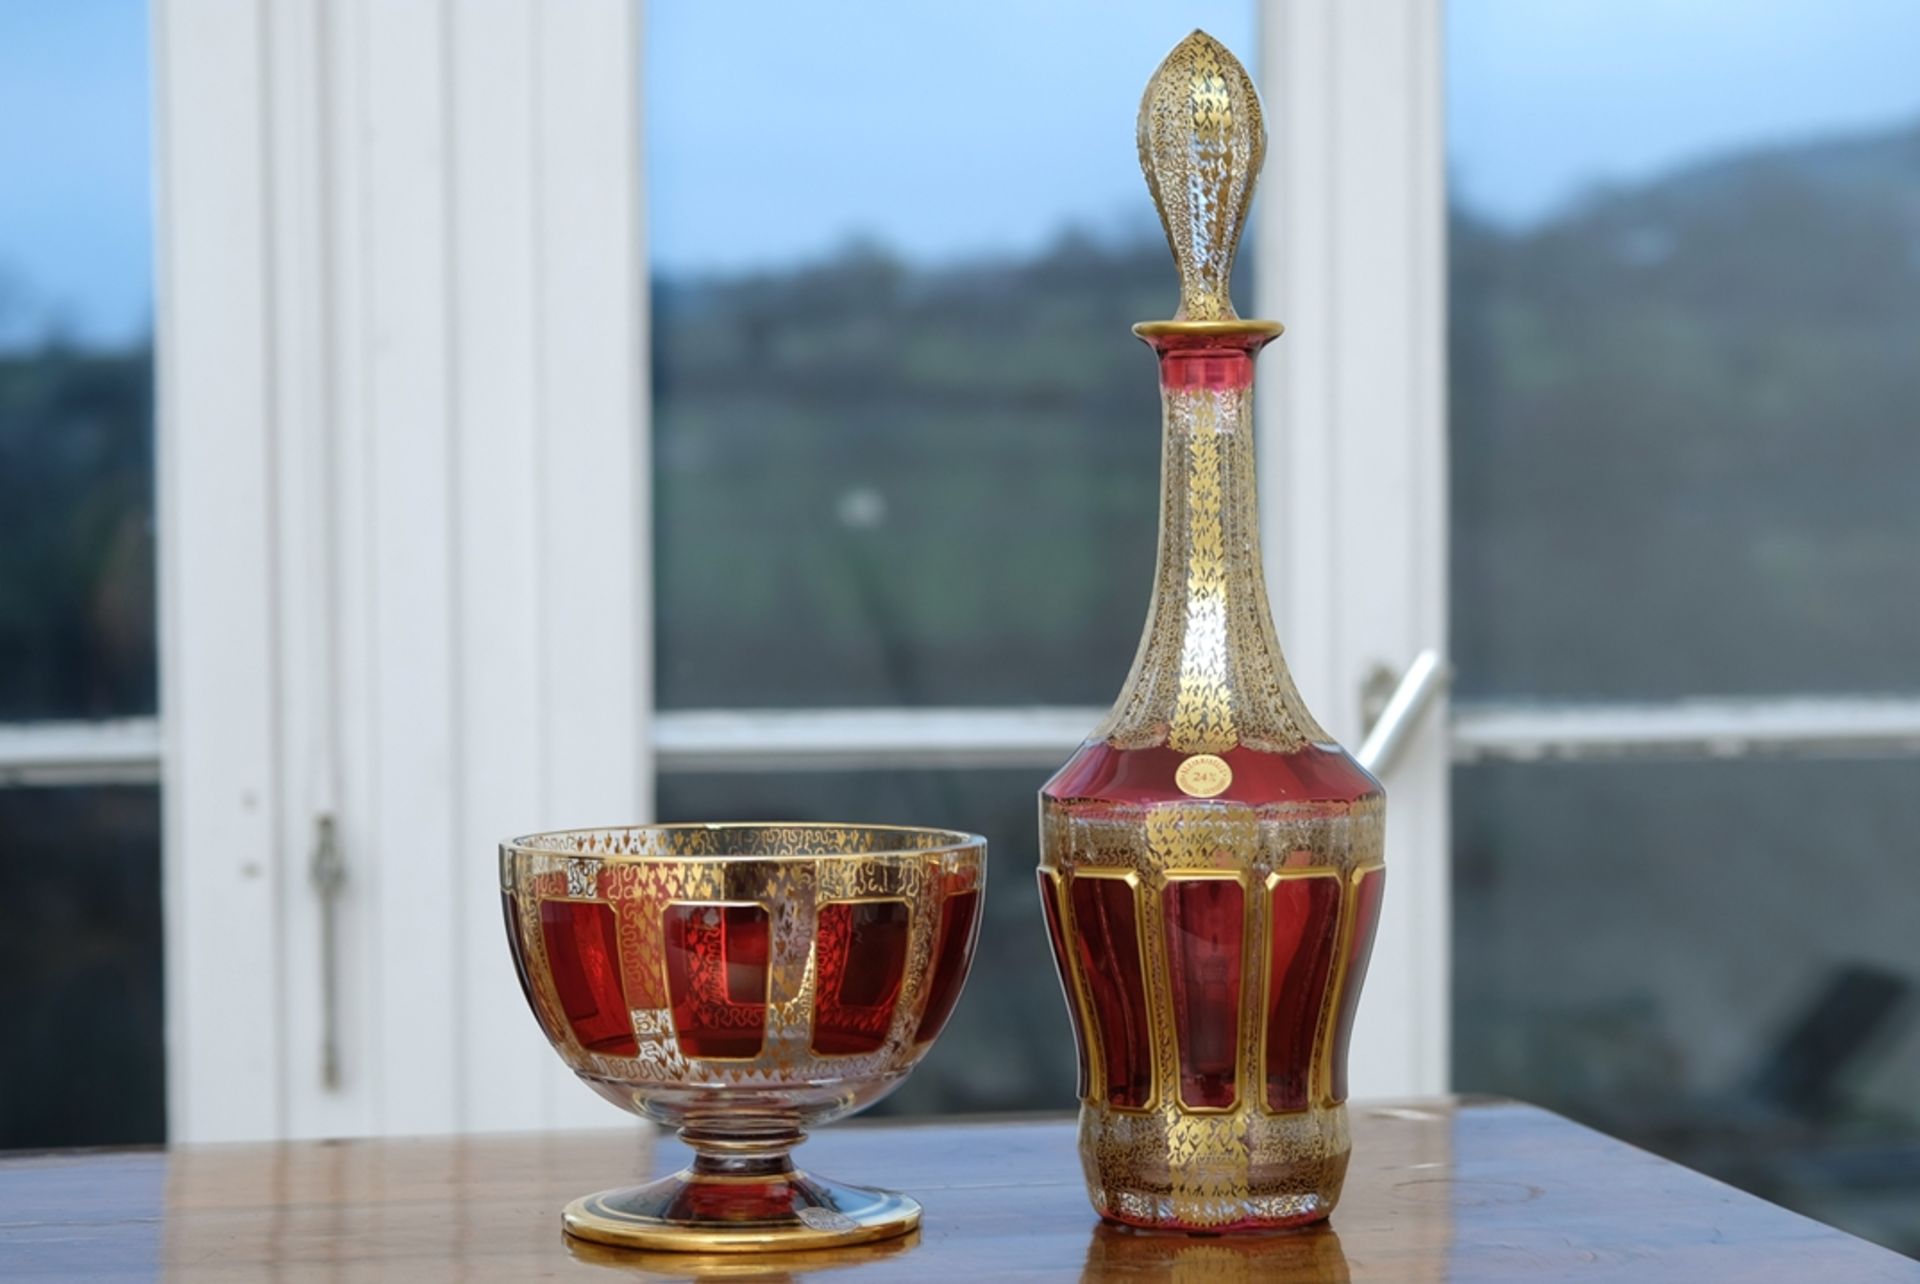 Art glass Ernst Wittig: Carafe and footed bowl made of ruby glass with gold painting.